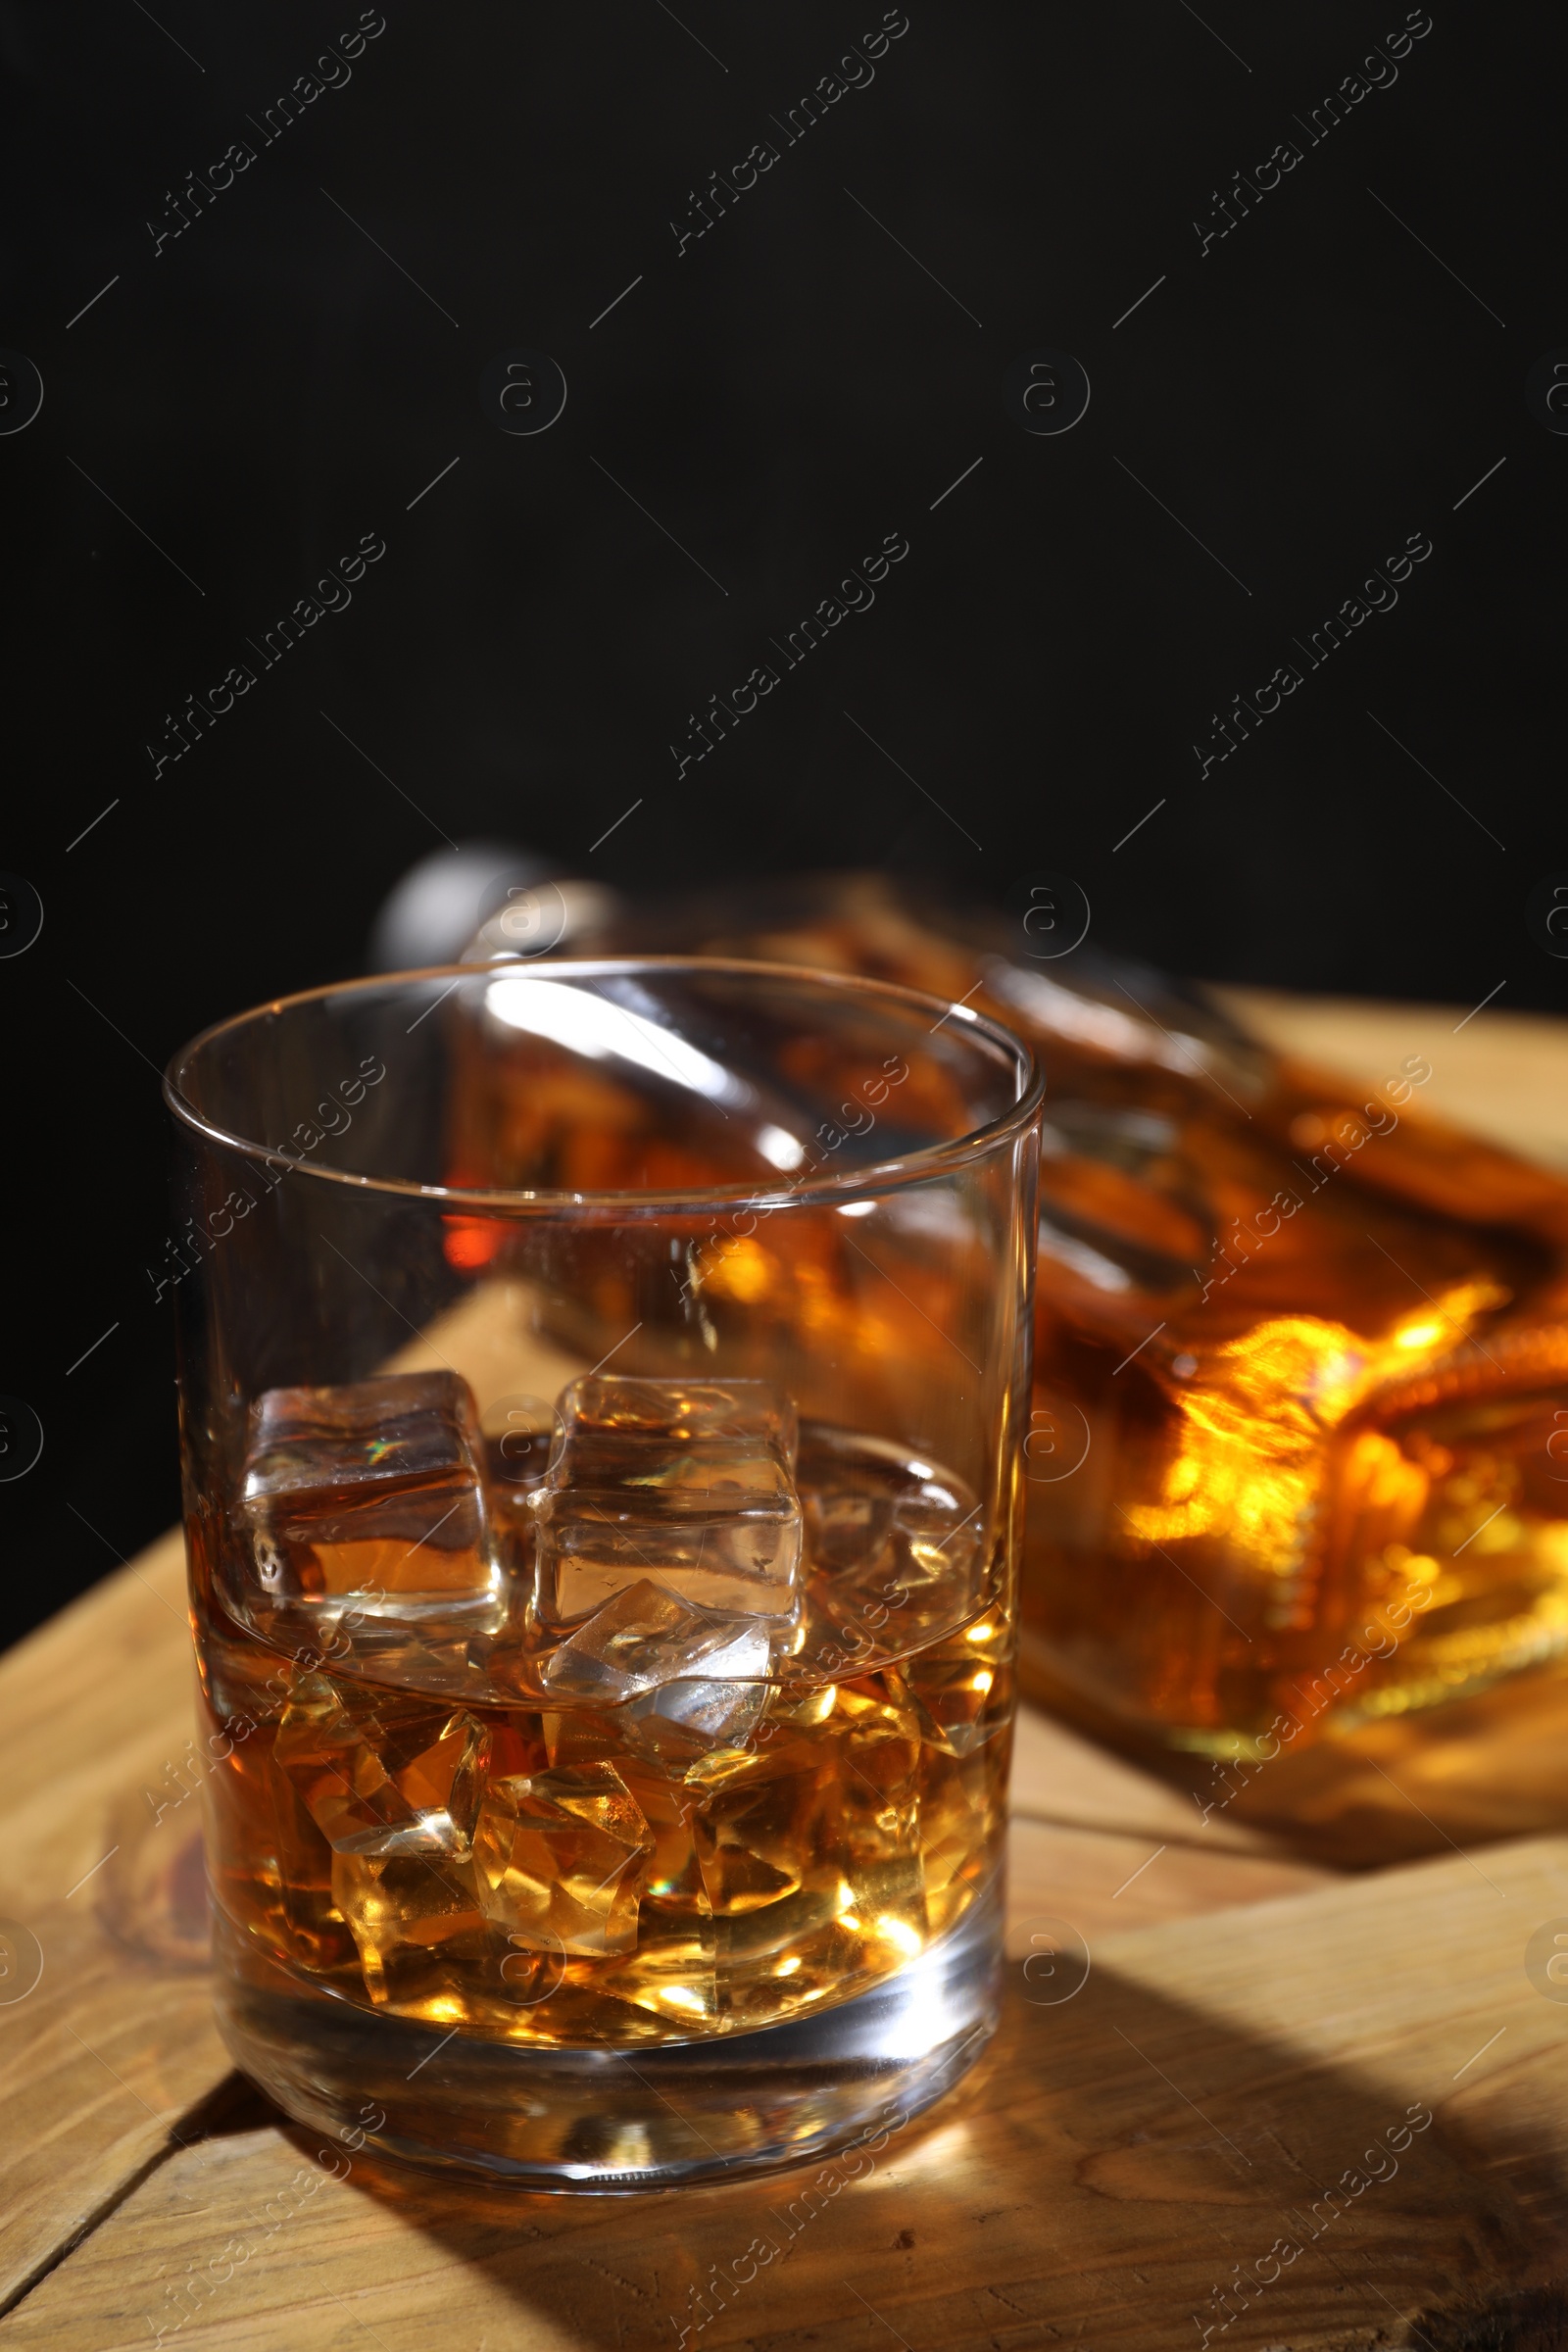 Photo of Whiskey with ice cubes in glass and bottle on wooden crate against black background, closeup